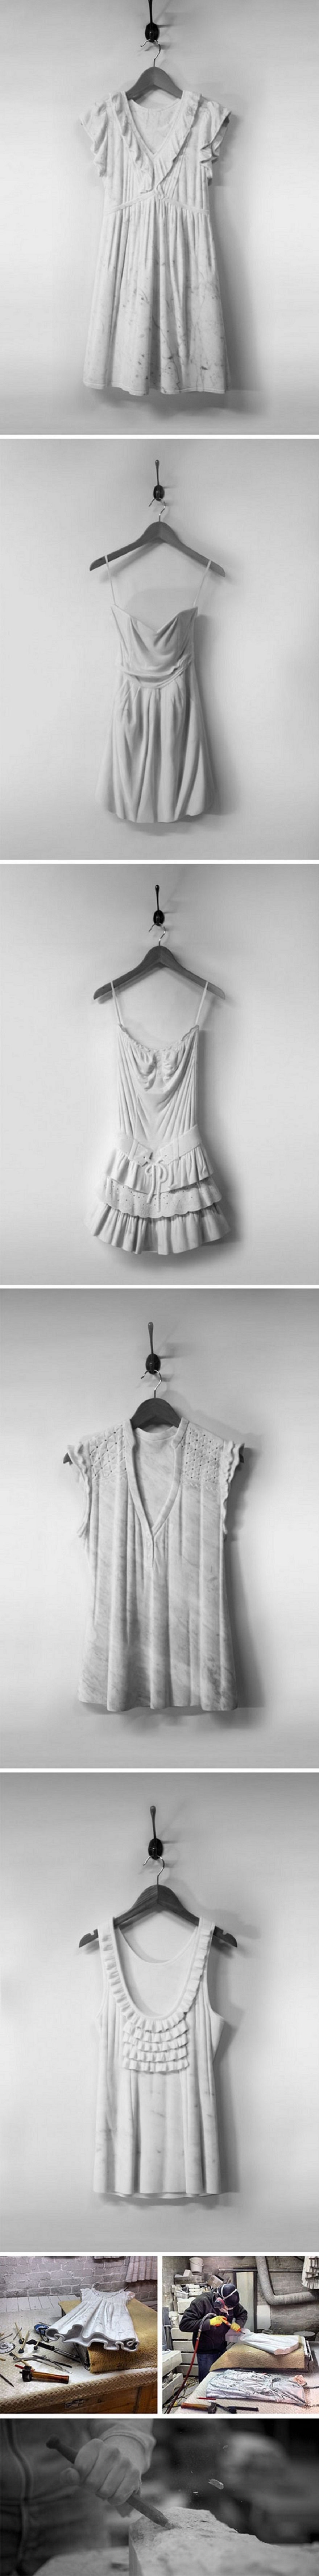 Dresses Carved Out Of Marble